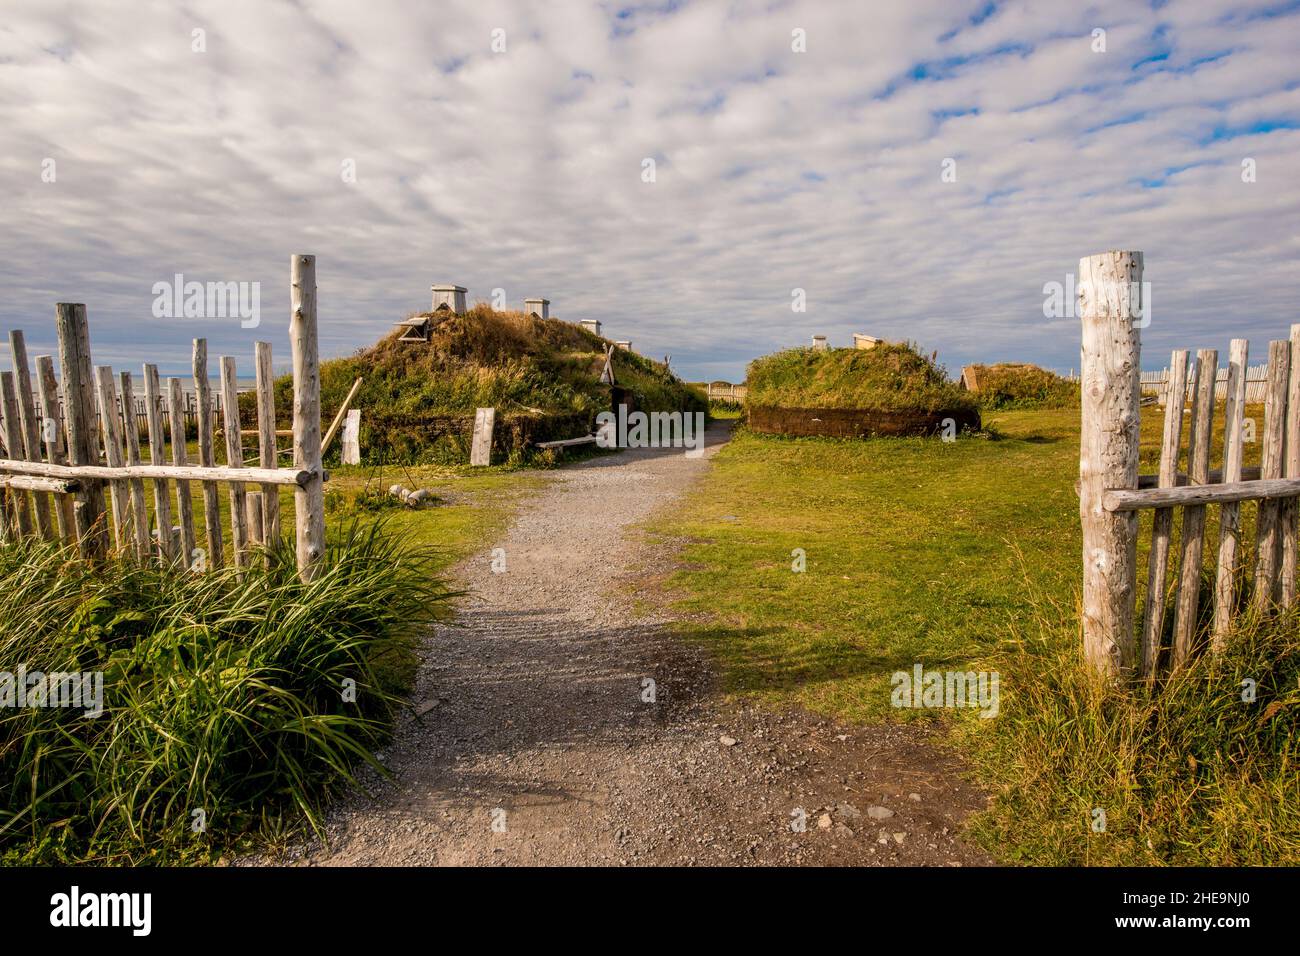 Viking Long House at L'Anse aux Meadows National Historic Site, Great Northern Peninsula, Newfoundland, Canada. Stock Photo